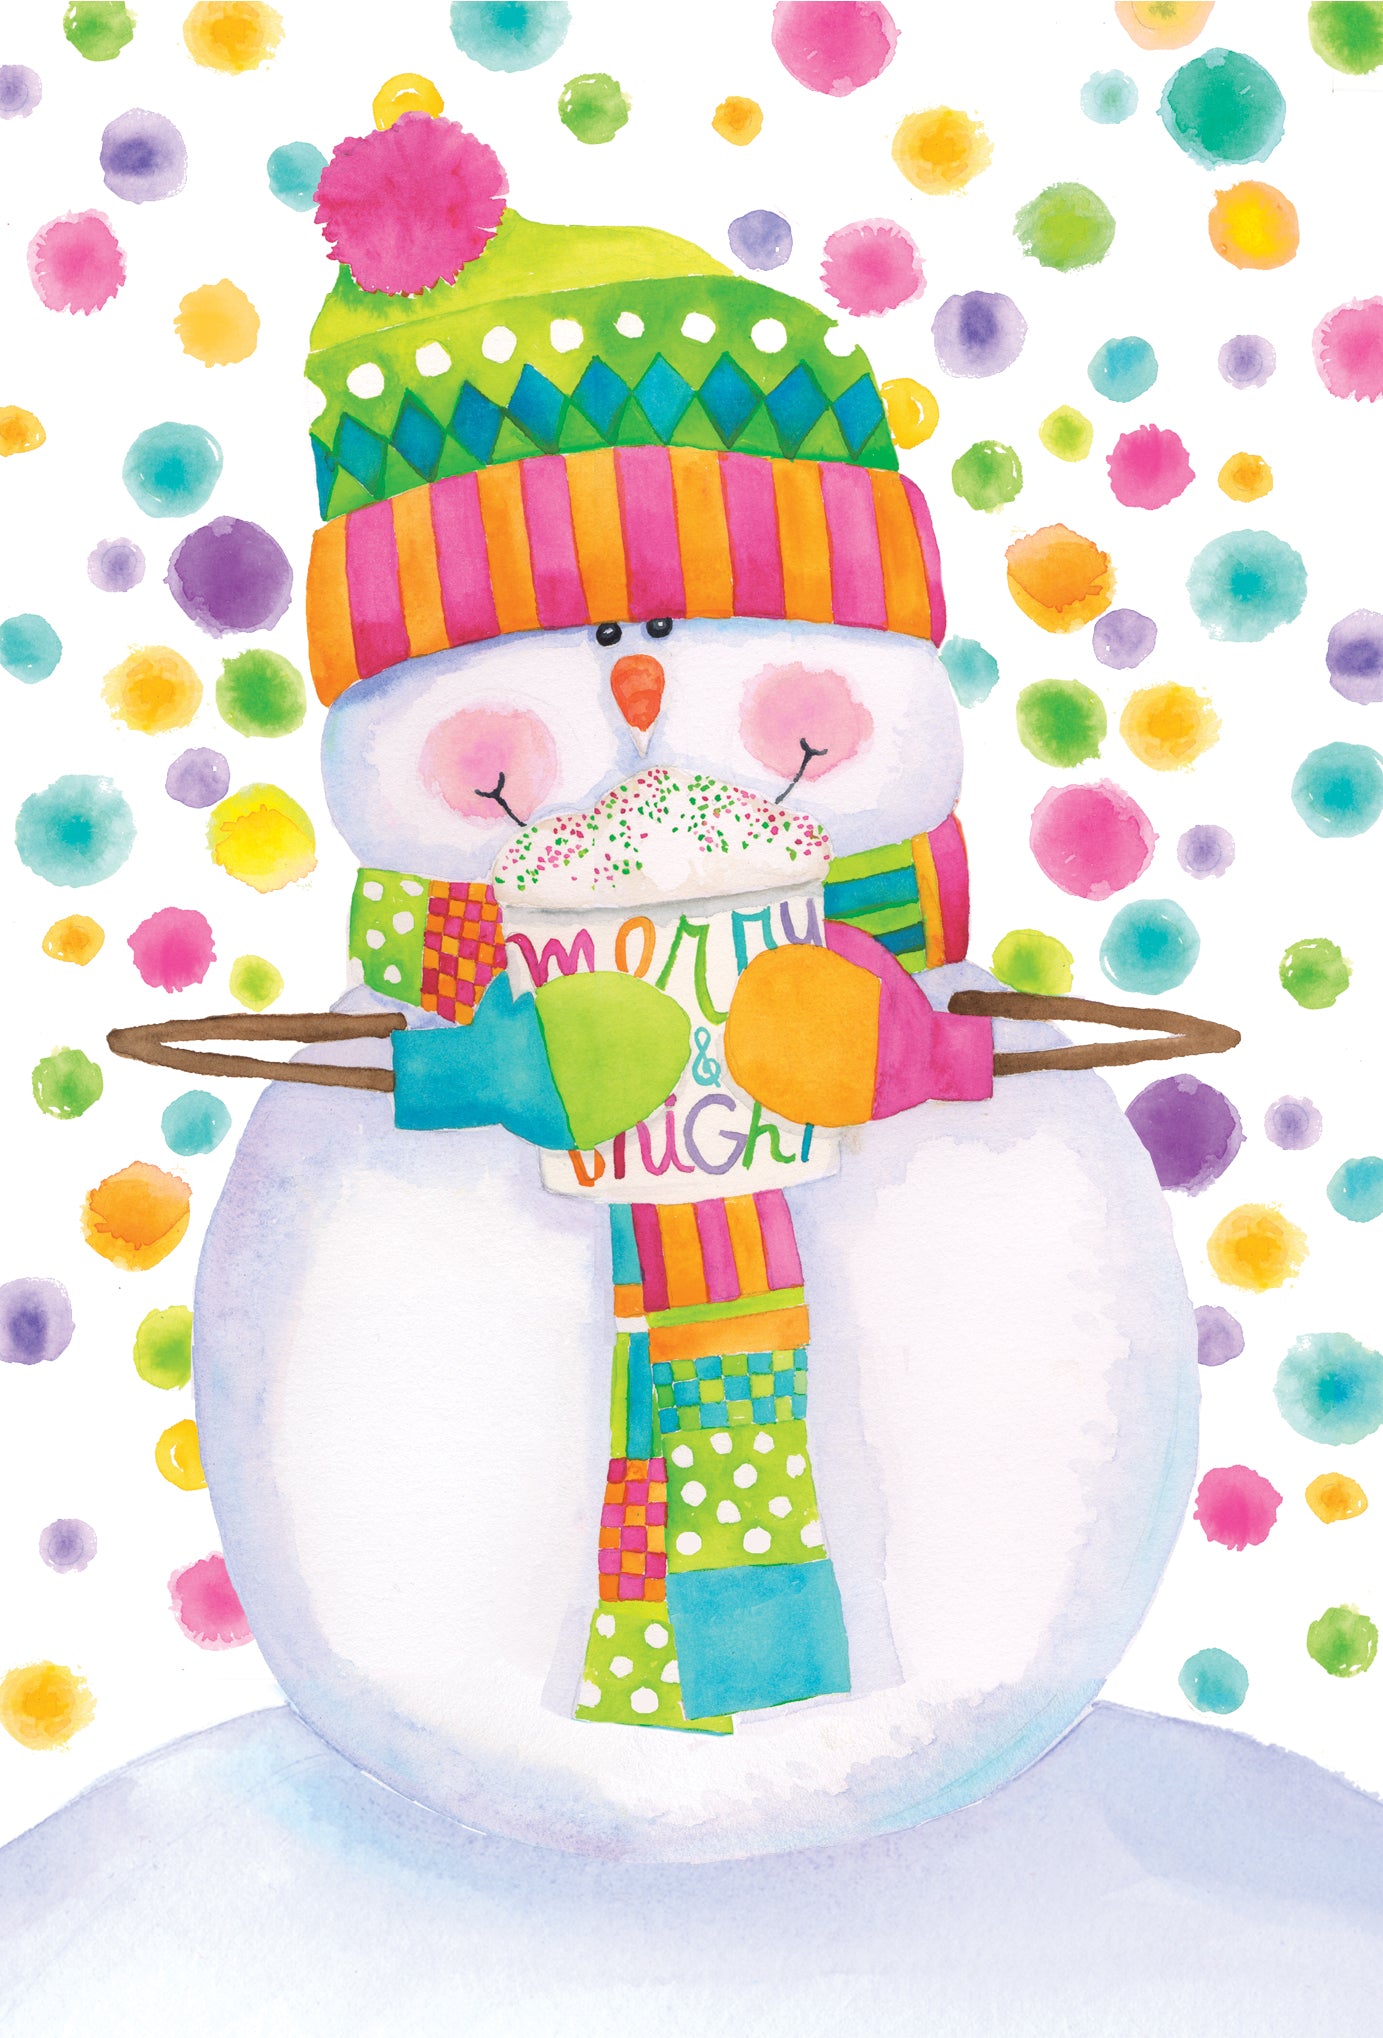 Snowman with Hat and Scarf- Christmas Card - Cardmore